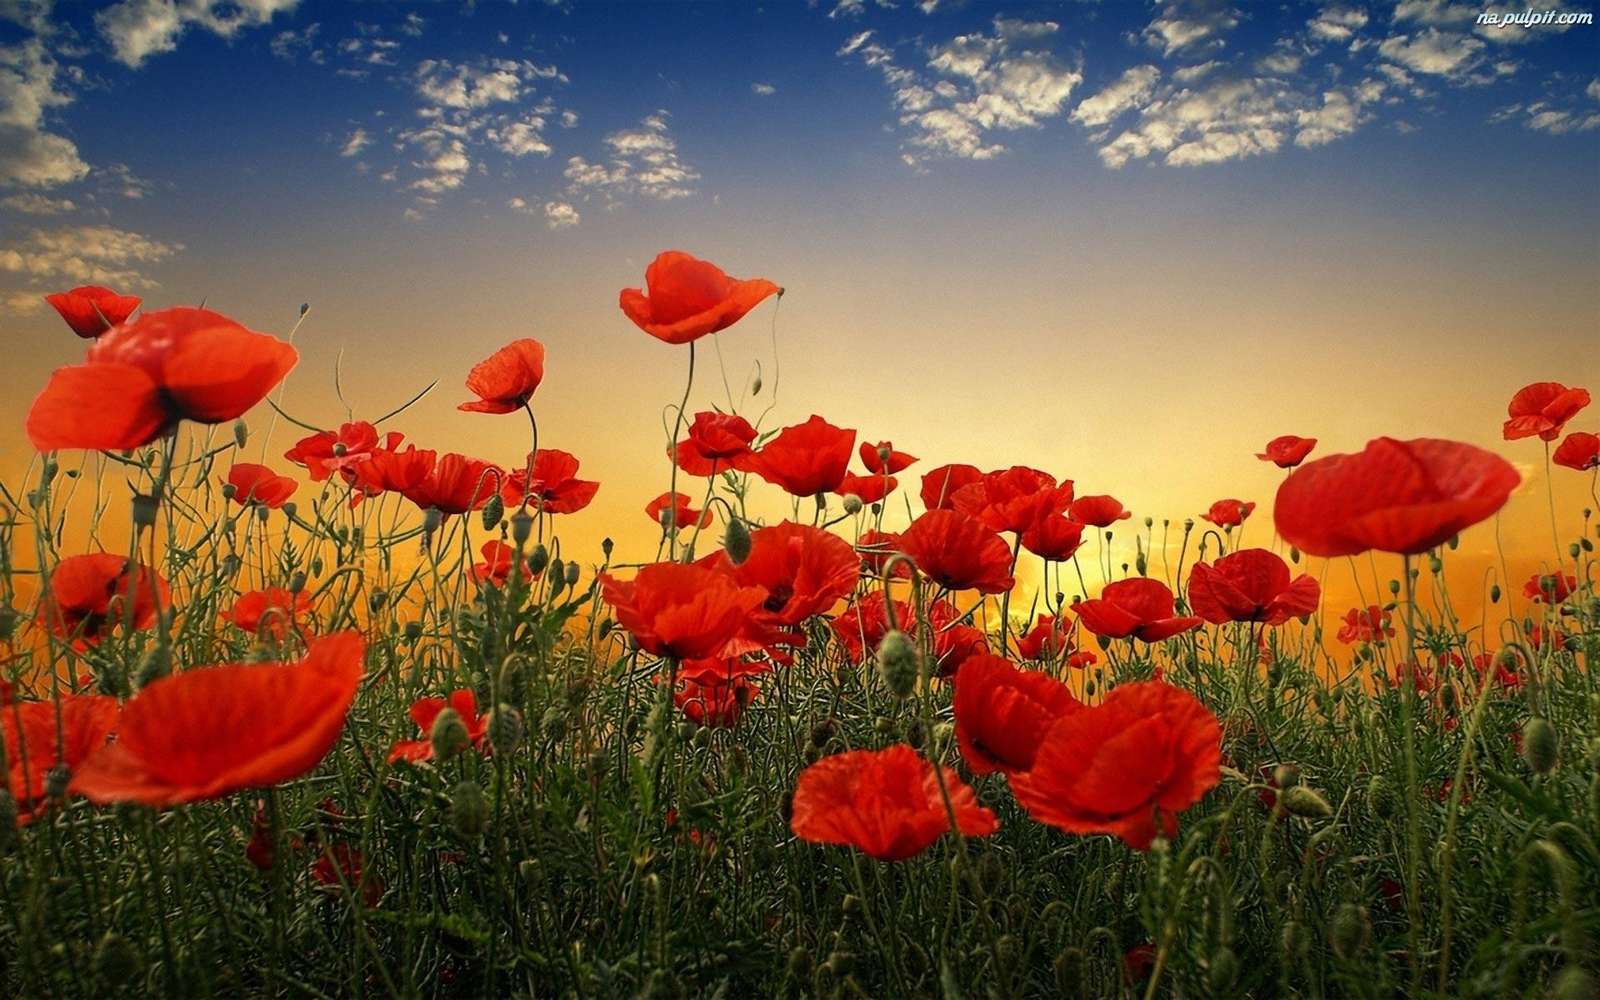 Red poppies jigsaw puzzle online